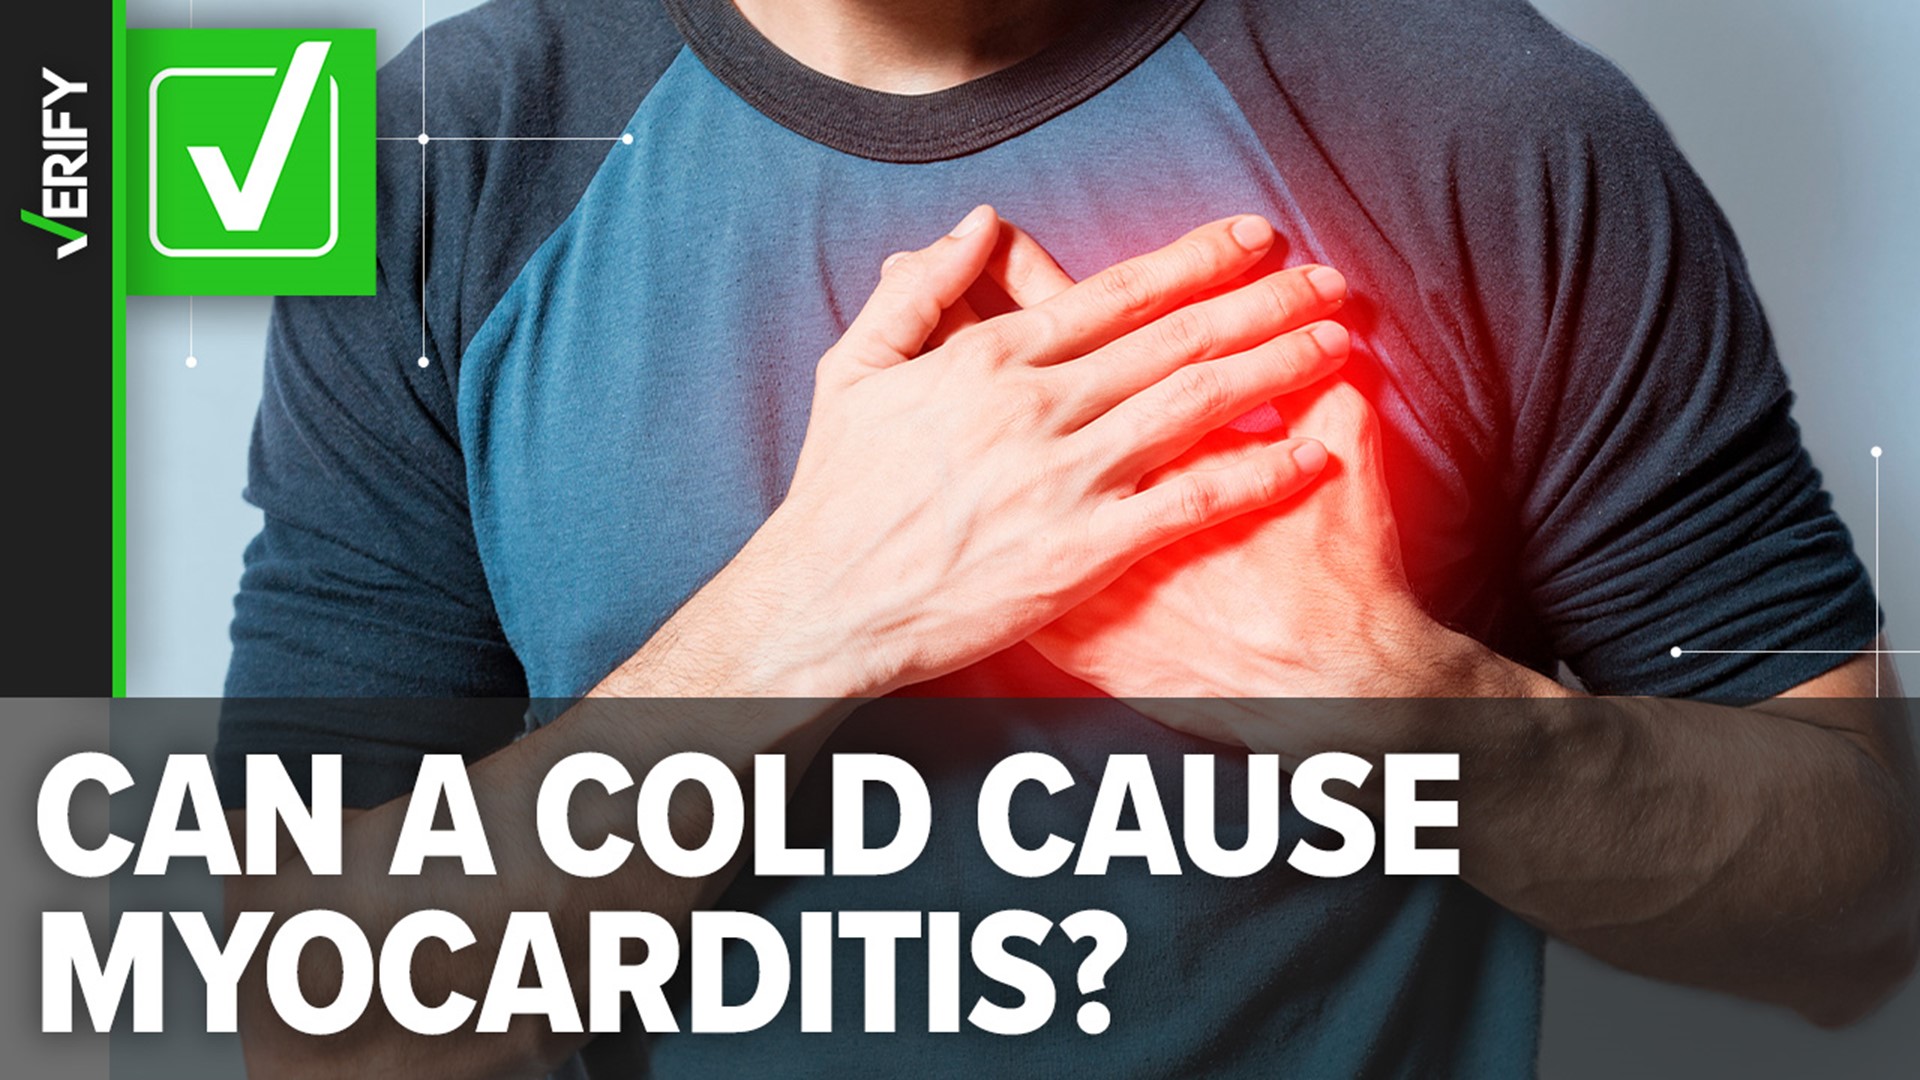 A VERIFY viewer asked if the common cold can cause myocarditis, a serious but rare condition that occurs when the heart muscle becomes inflamed. It can.